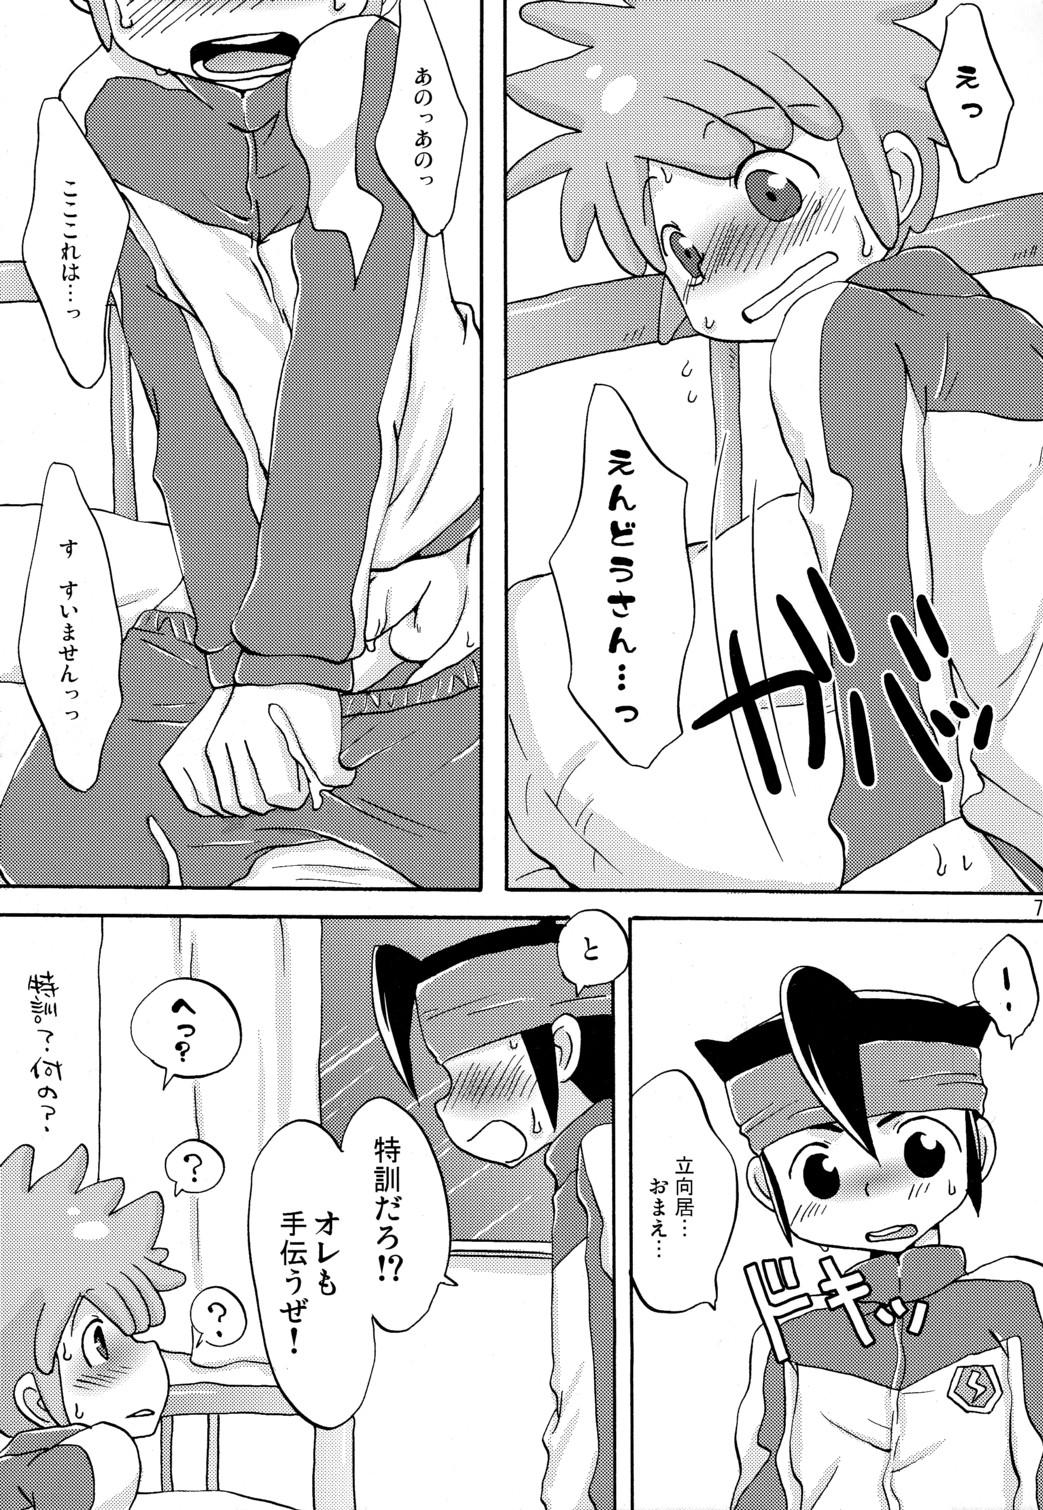 Cowgirl SWEET ROOM - Inazuma eleven Casting - Page 11